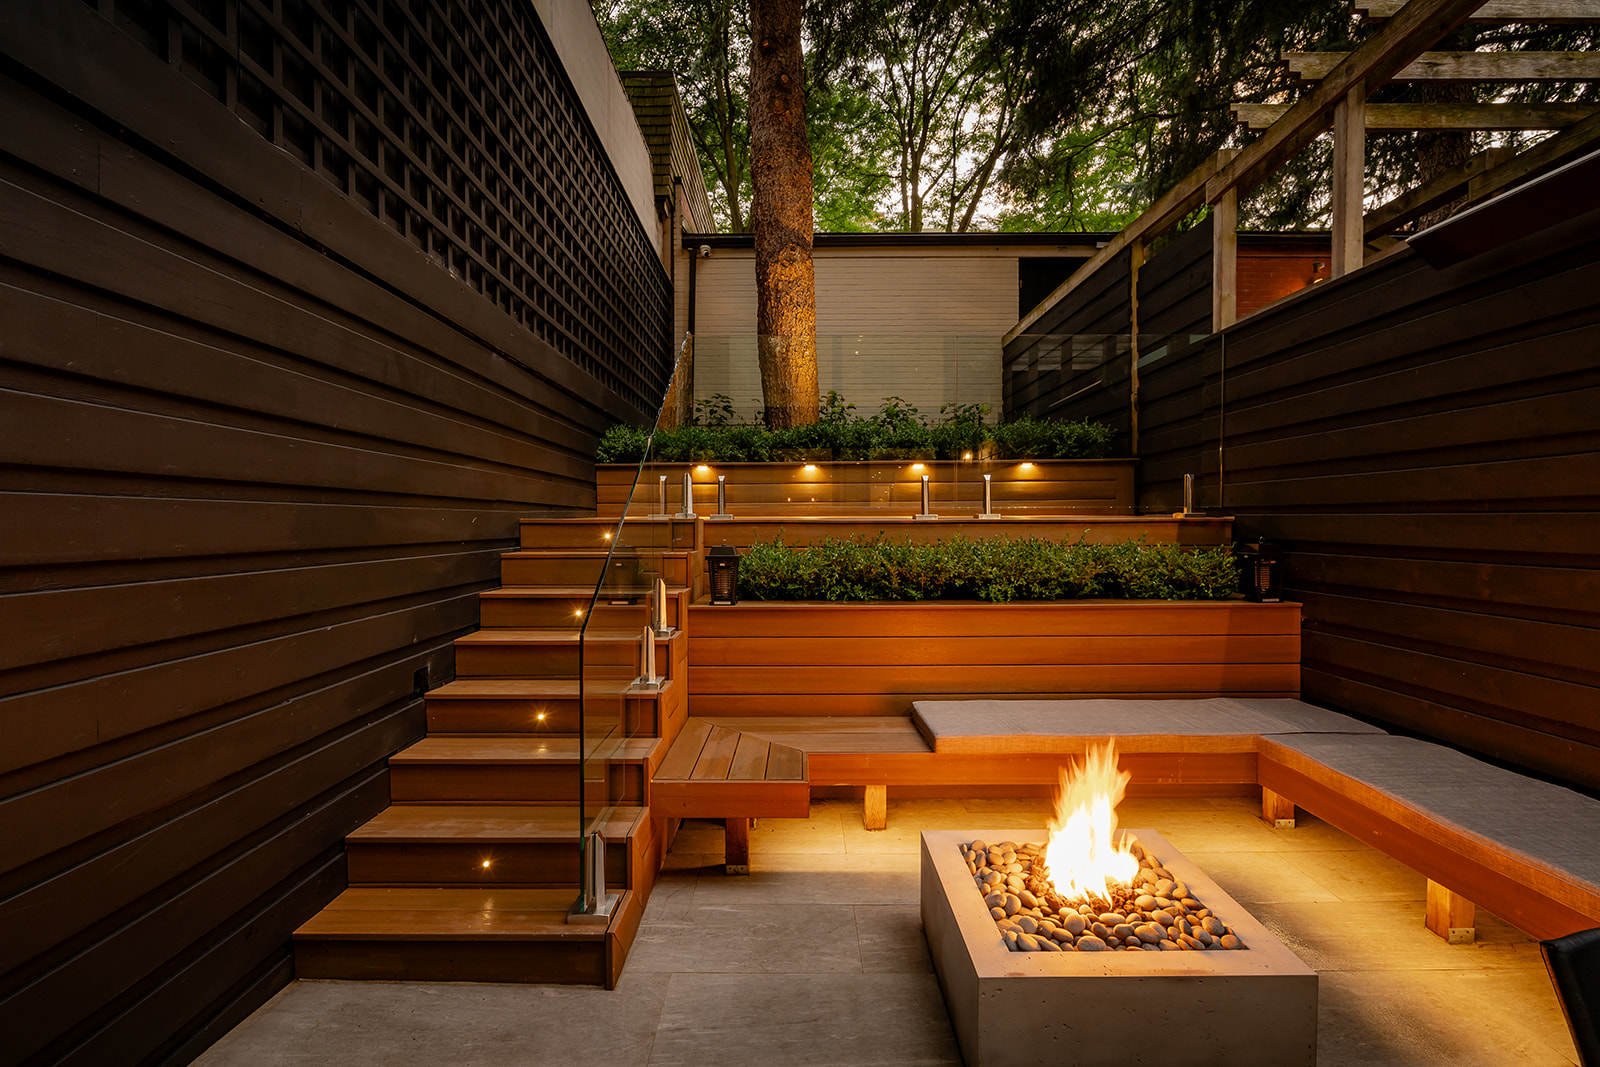 A seating area with a lit fireplace in the middle.